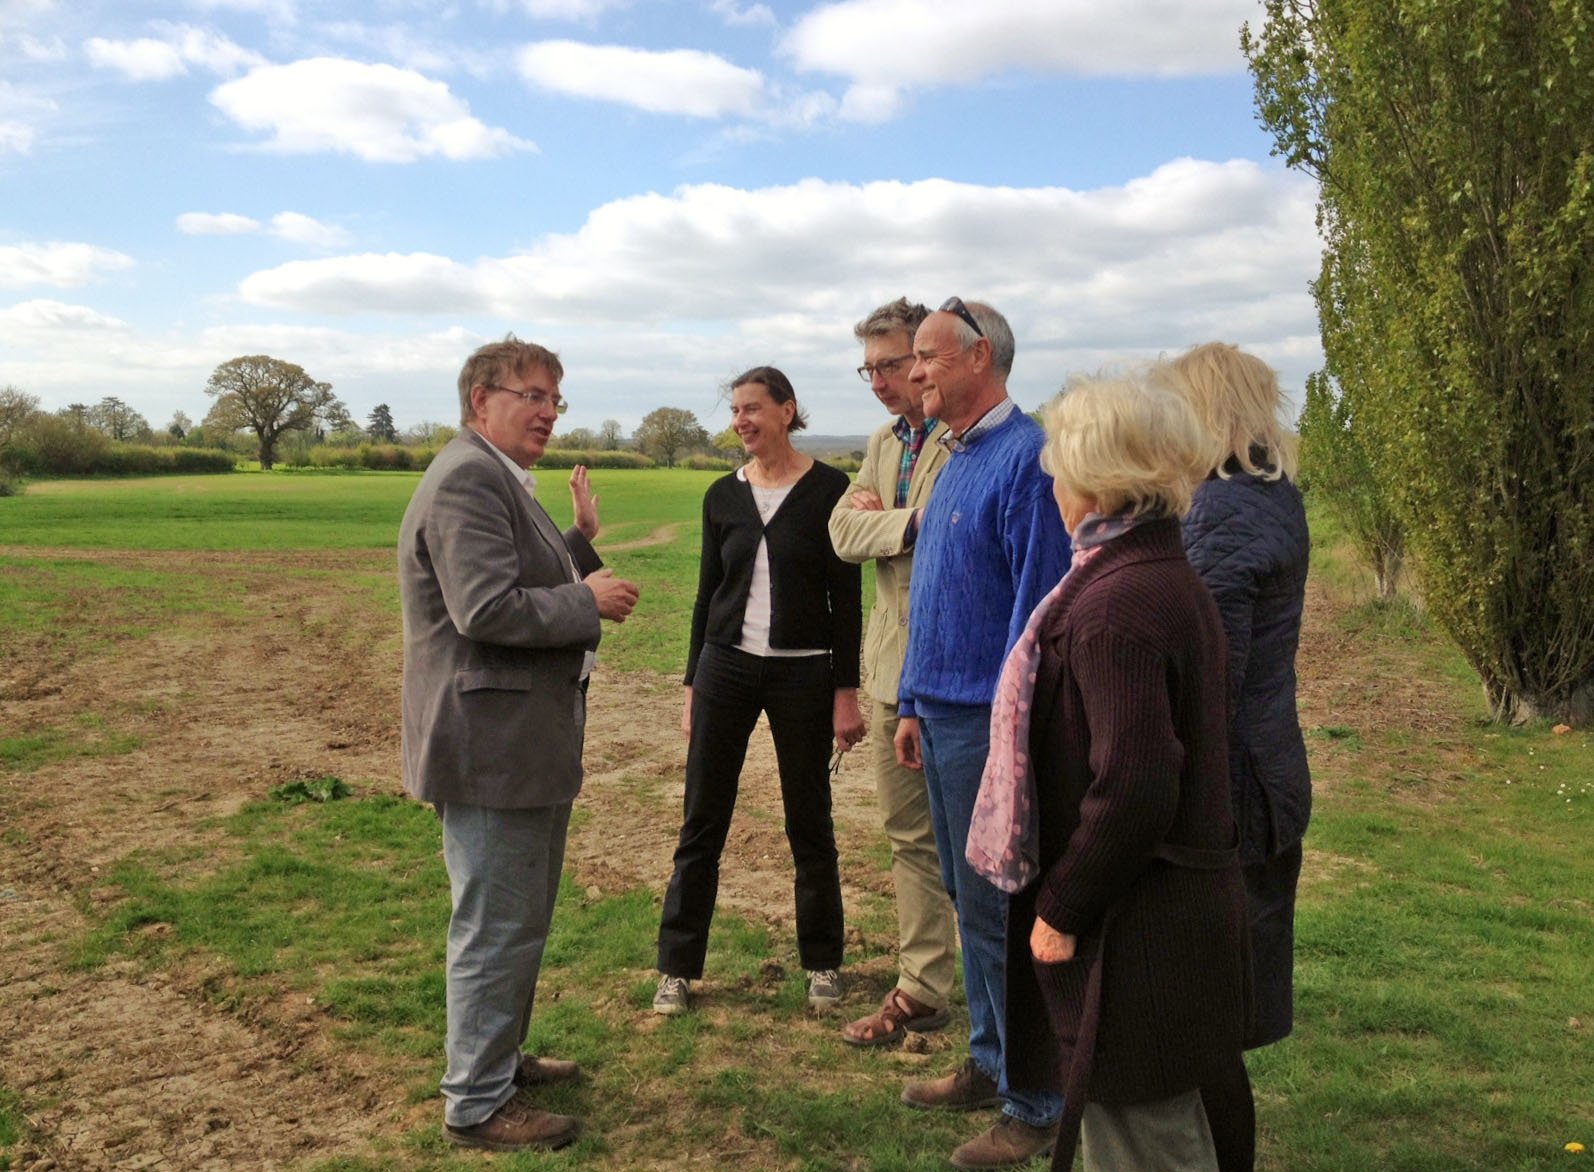 Image of the local councillors talking together outdoors